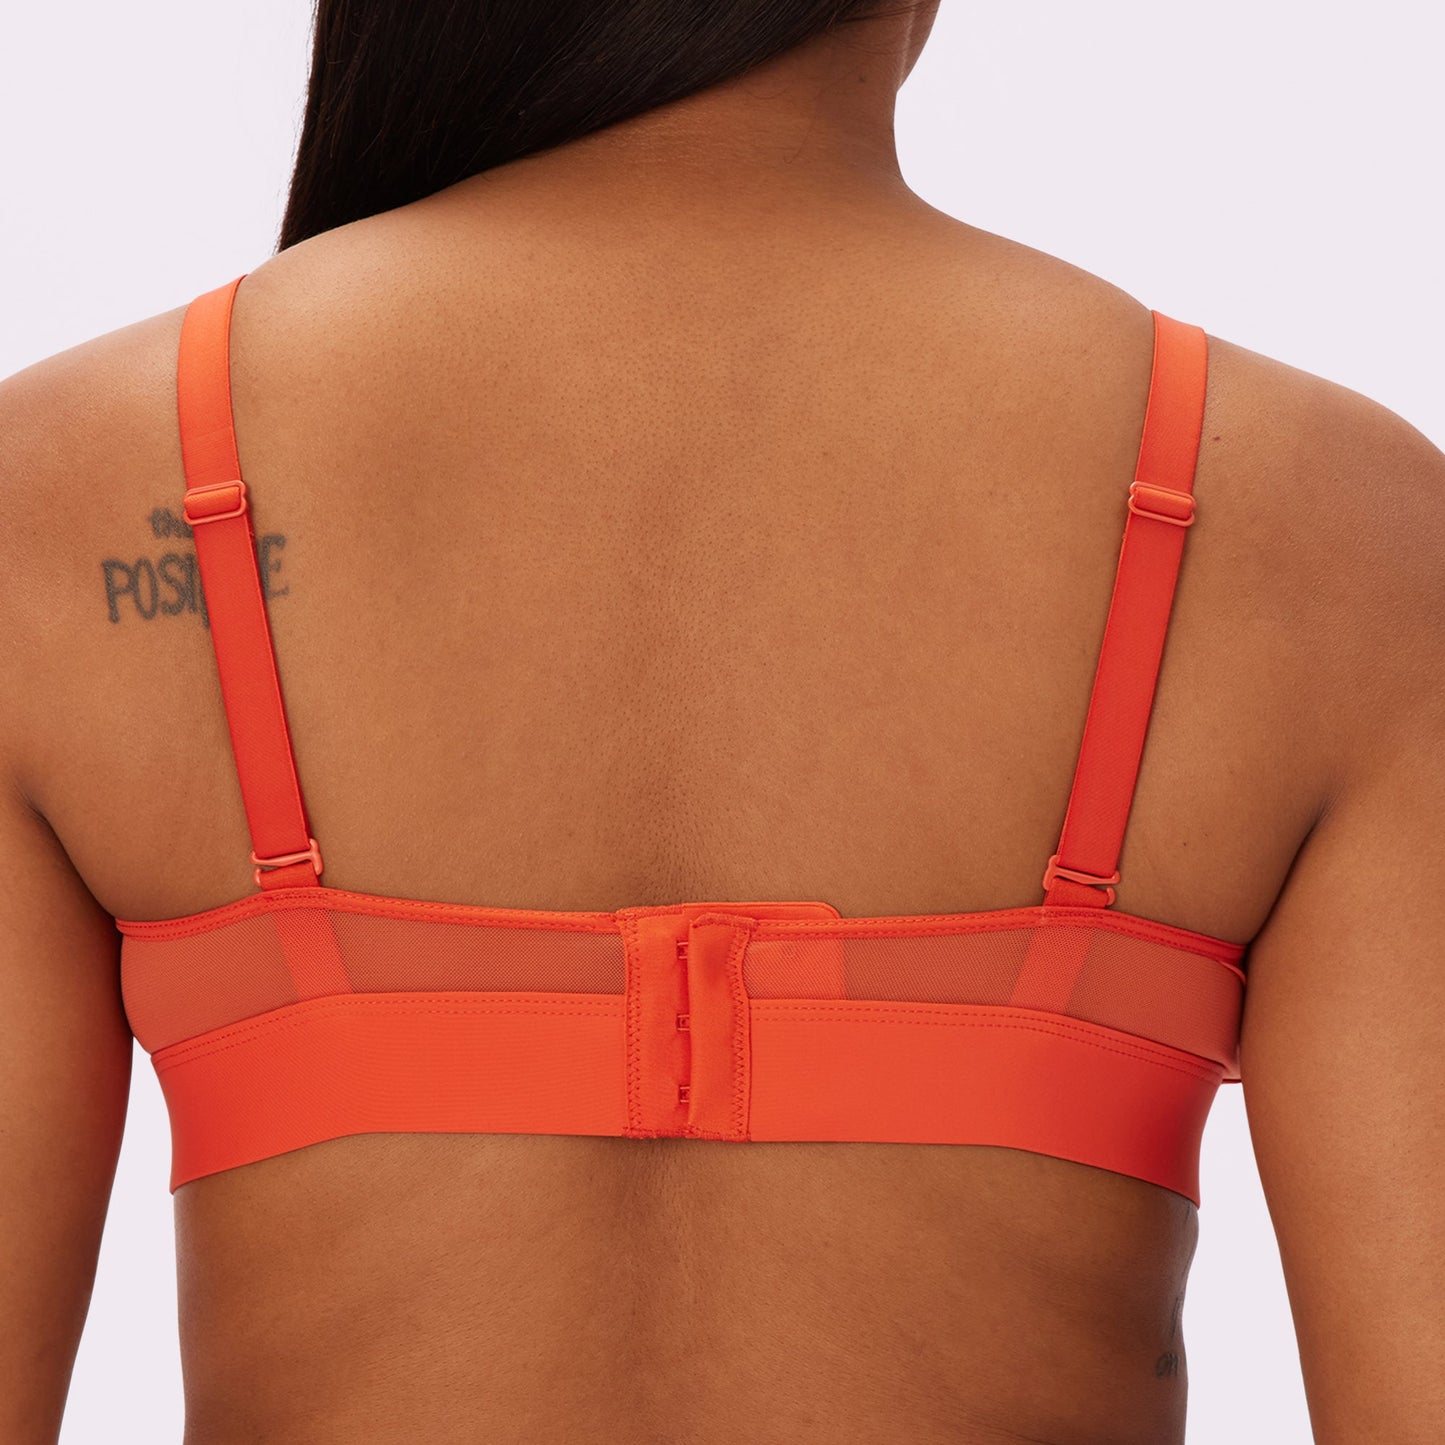 Dream Fit Triangle Bralette | Ultra-Soft Re:Play | Archive (Varsity)